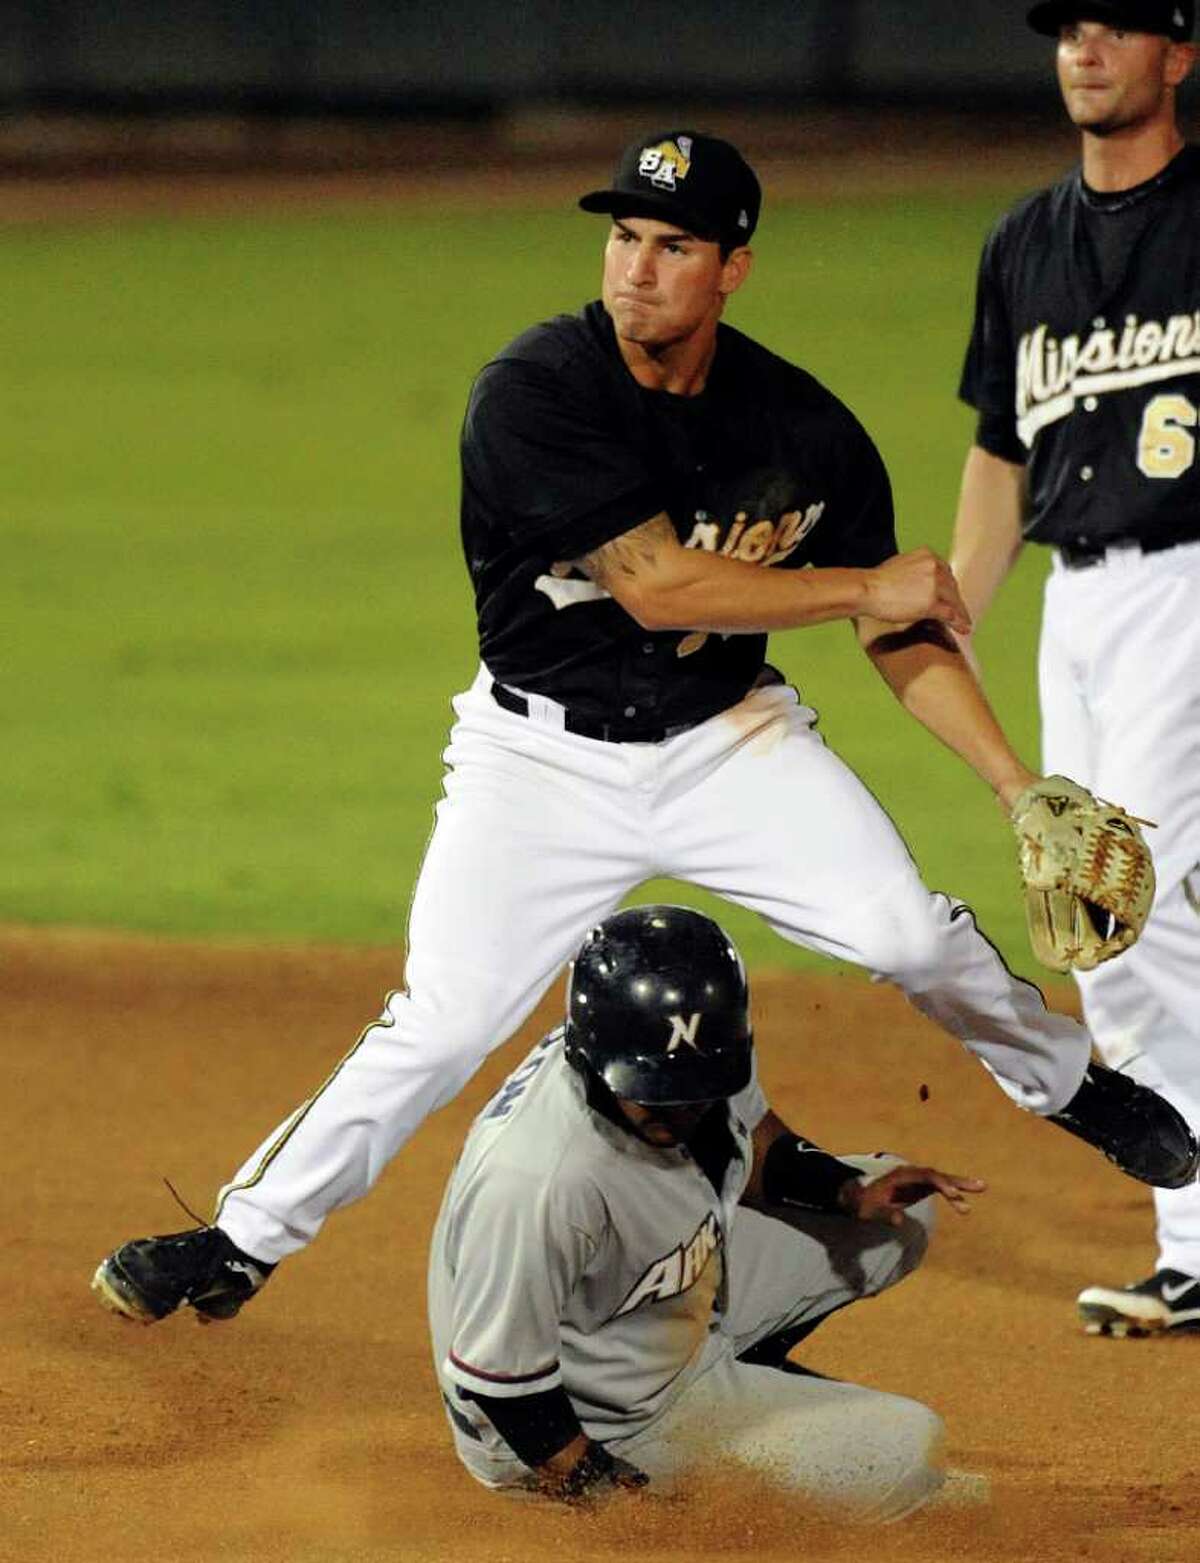 San Antonio Missions shortstop Dean Anna turns a double play as Christian Colon of the Northwest Arkansas Naturals slides in during Texas League action at Wolff Stadium on Thursday, July 7, 2011. BILLY CALZADA / gcalzada@express-news.net